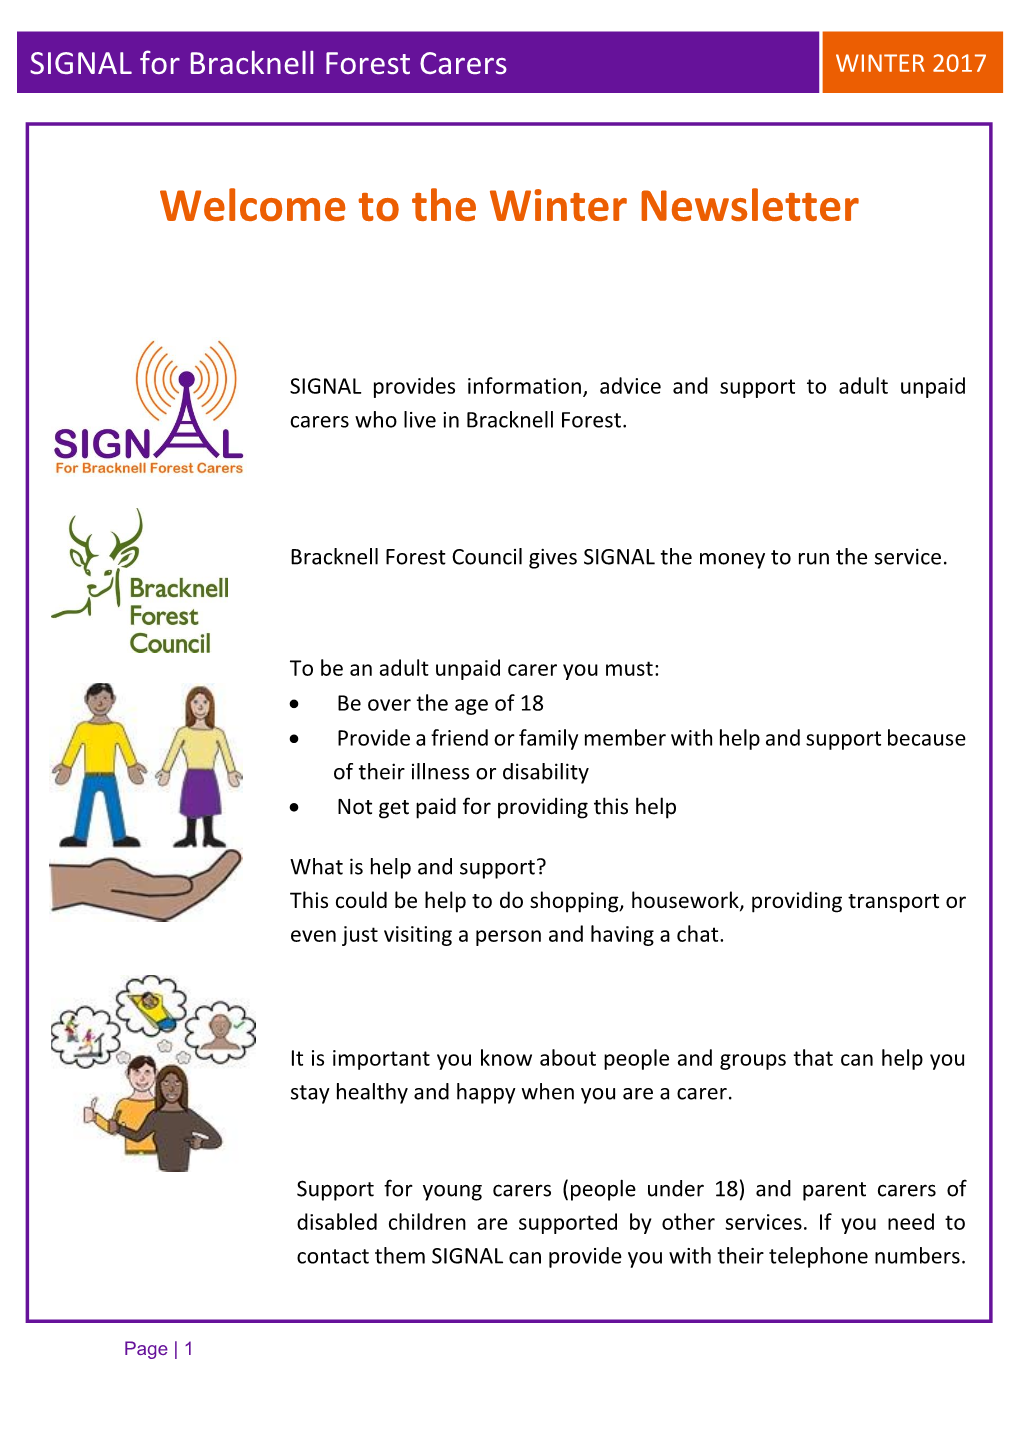 SIGNAL for Bracknell Forest Carers WINTER 2017